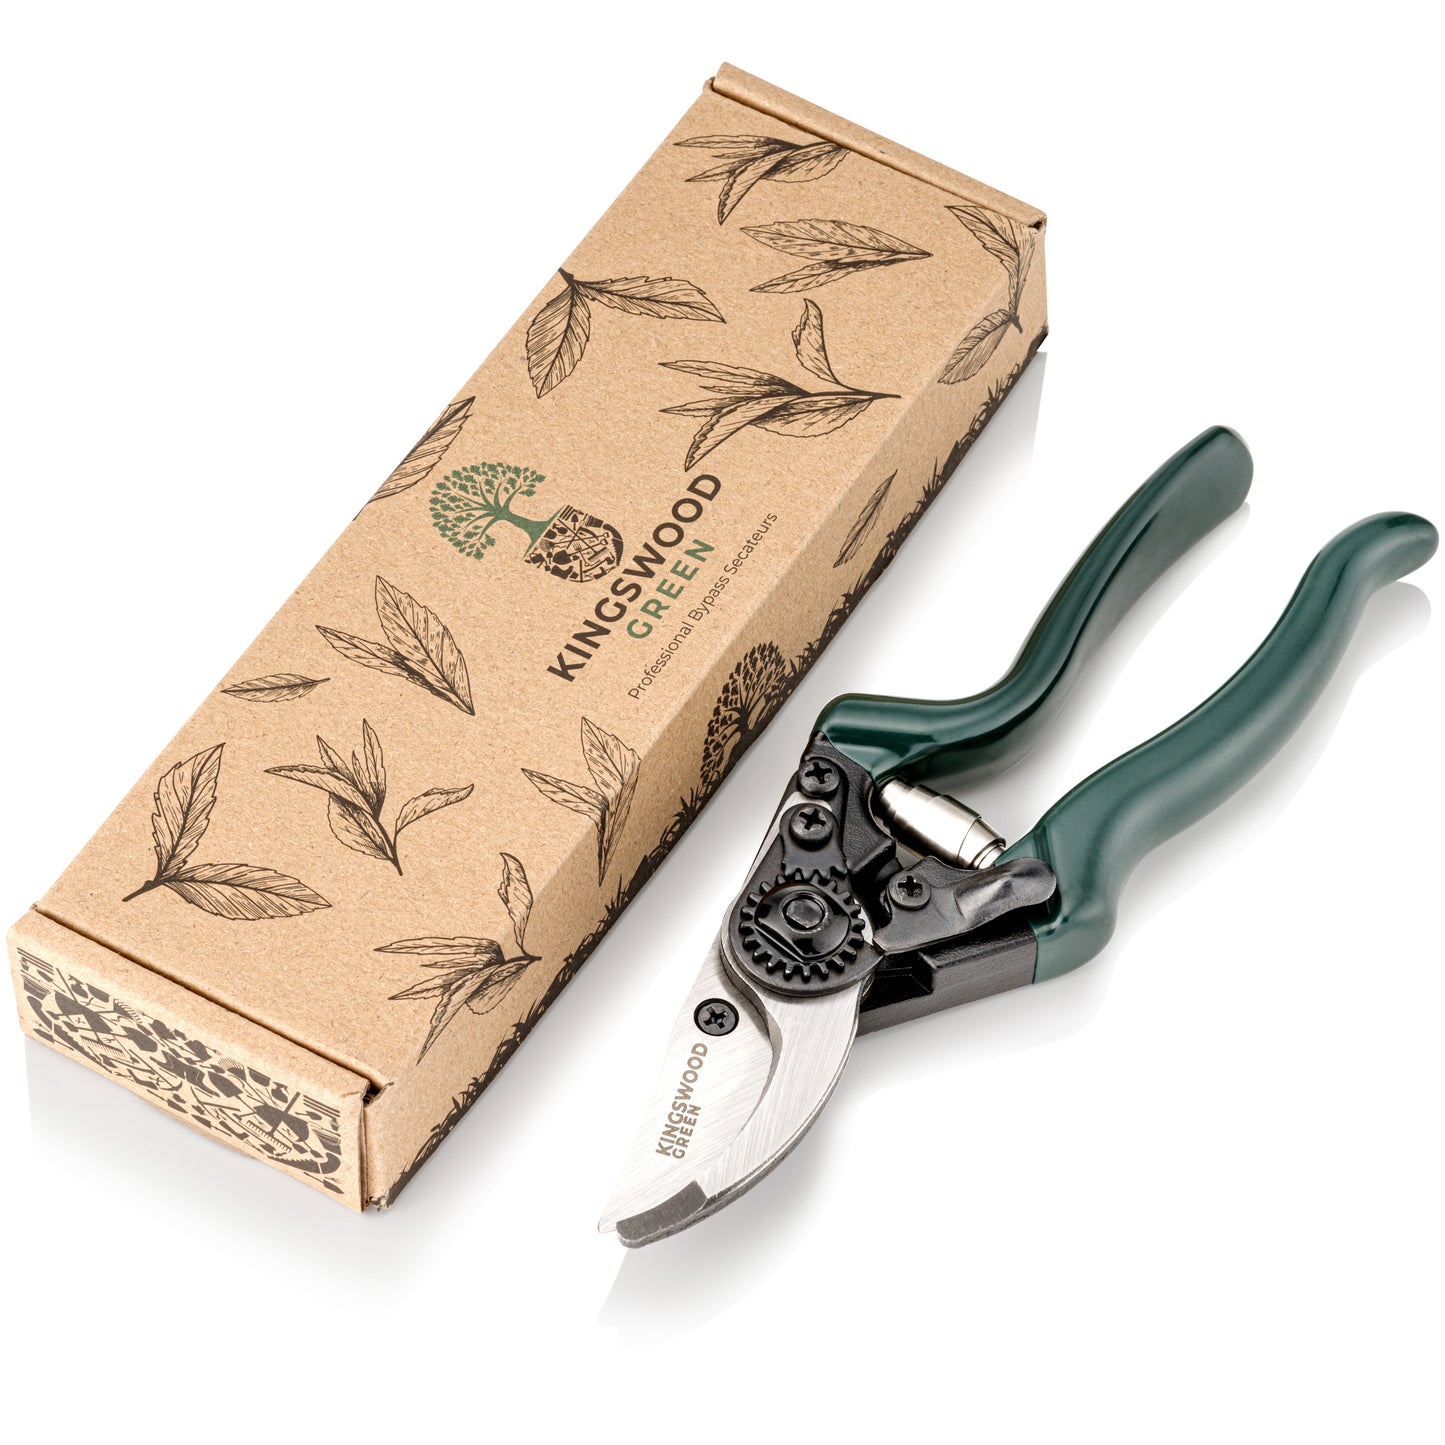 Kingswood Green Professional Bypass Secateurs